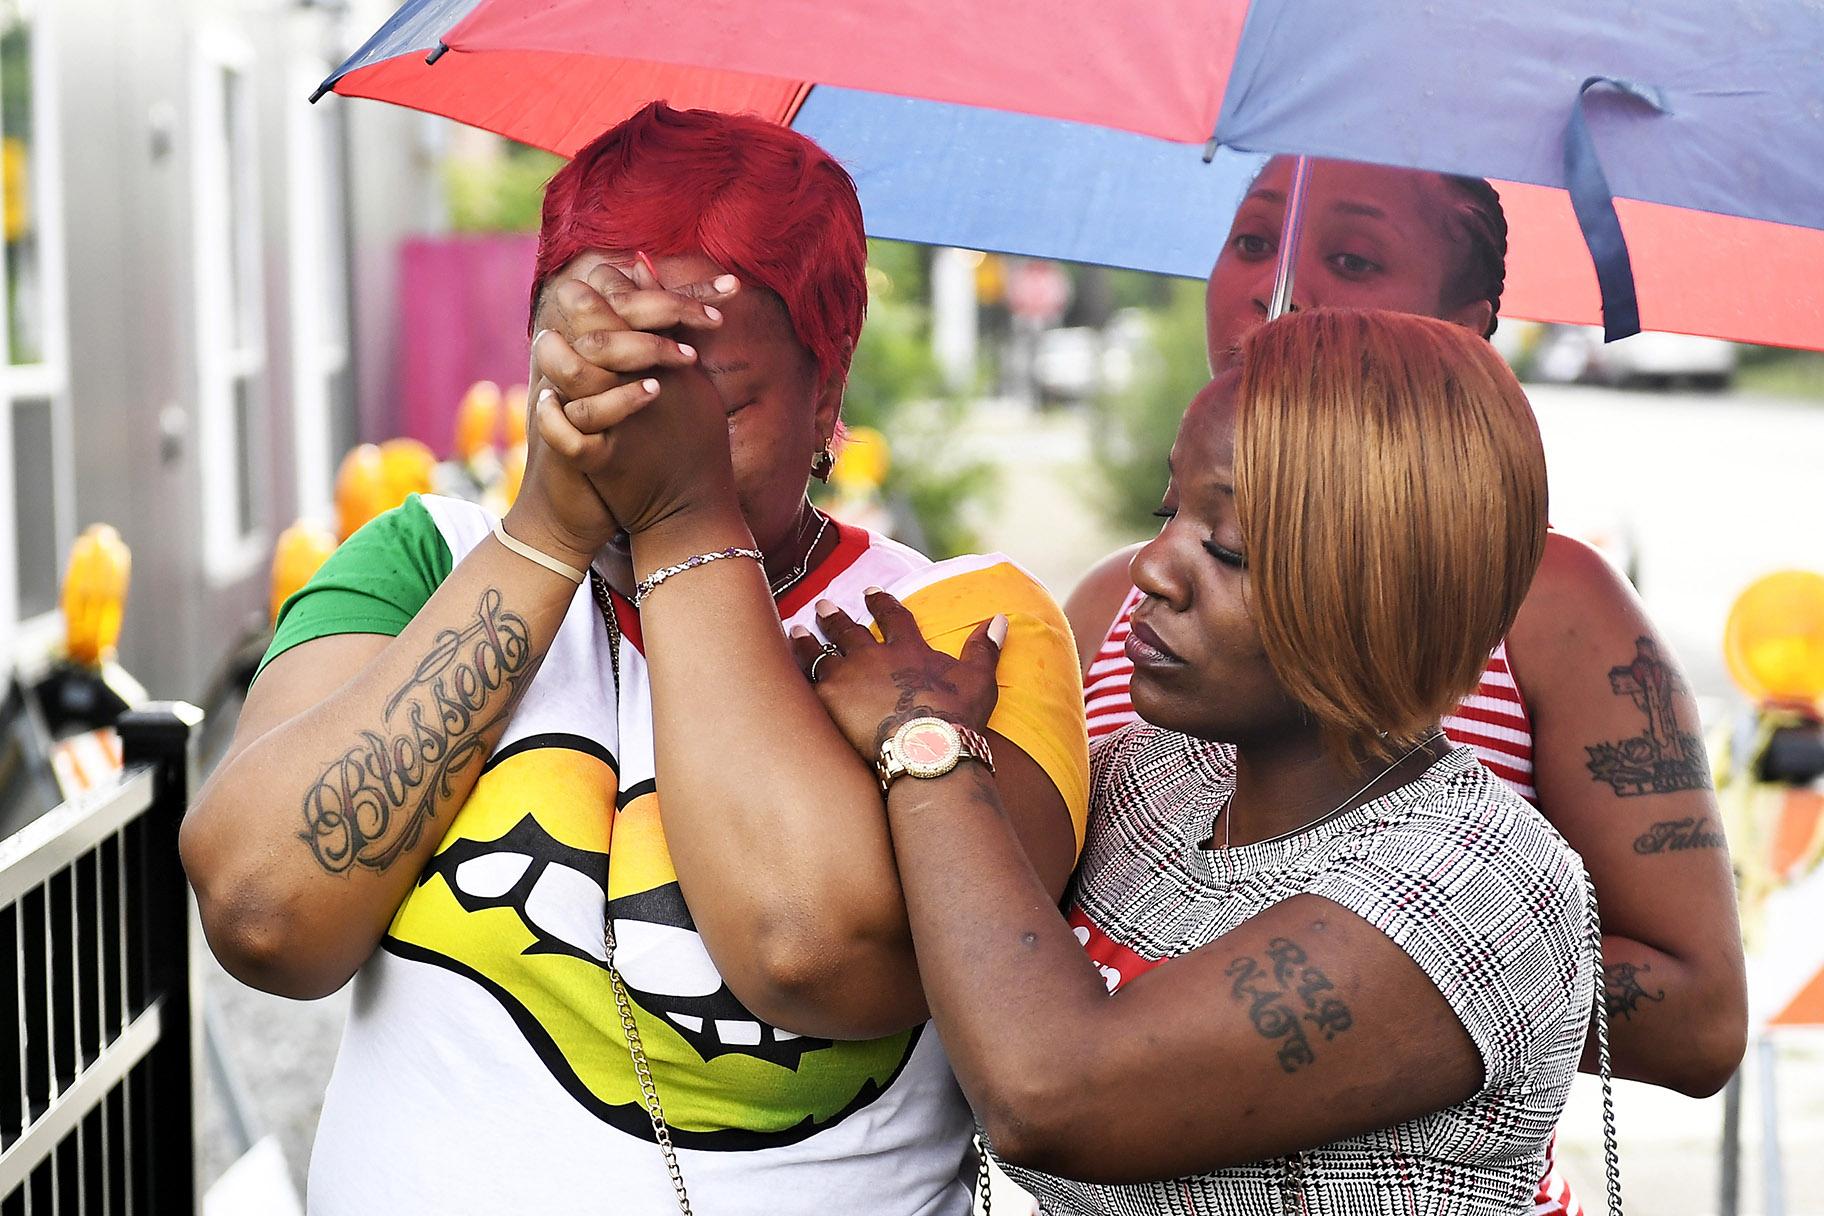  Charvonda Andrews is consoled Tuesday, July 30, 2019 in Chicago as she mourns two women killed July 26 while working as volunteers with a group called Mothers Against Senseless Killings. (John Alexander / Chicago Sun-Times via AP)